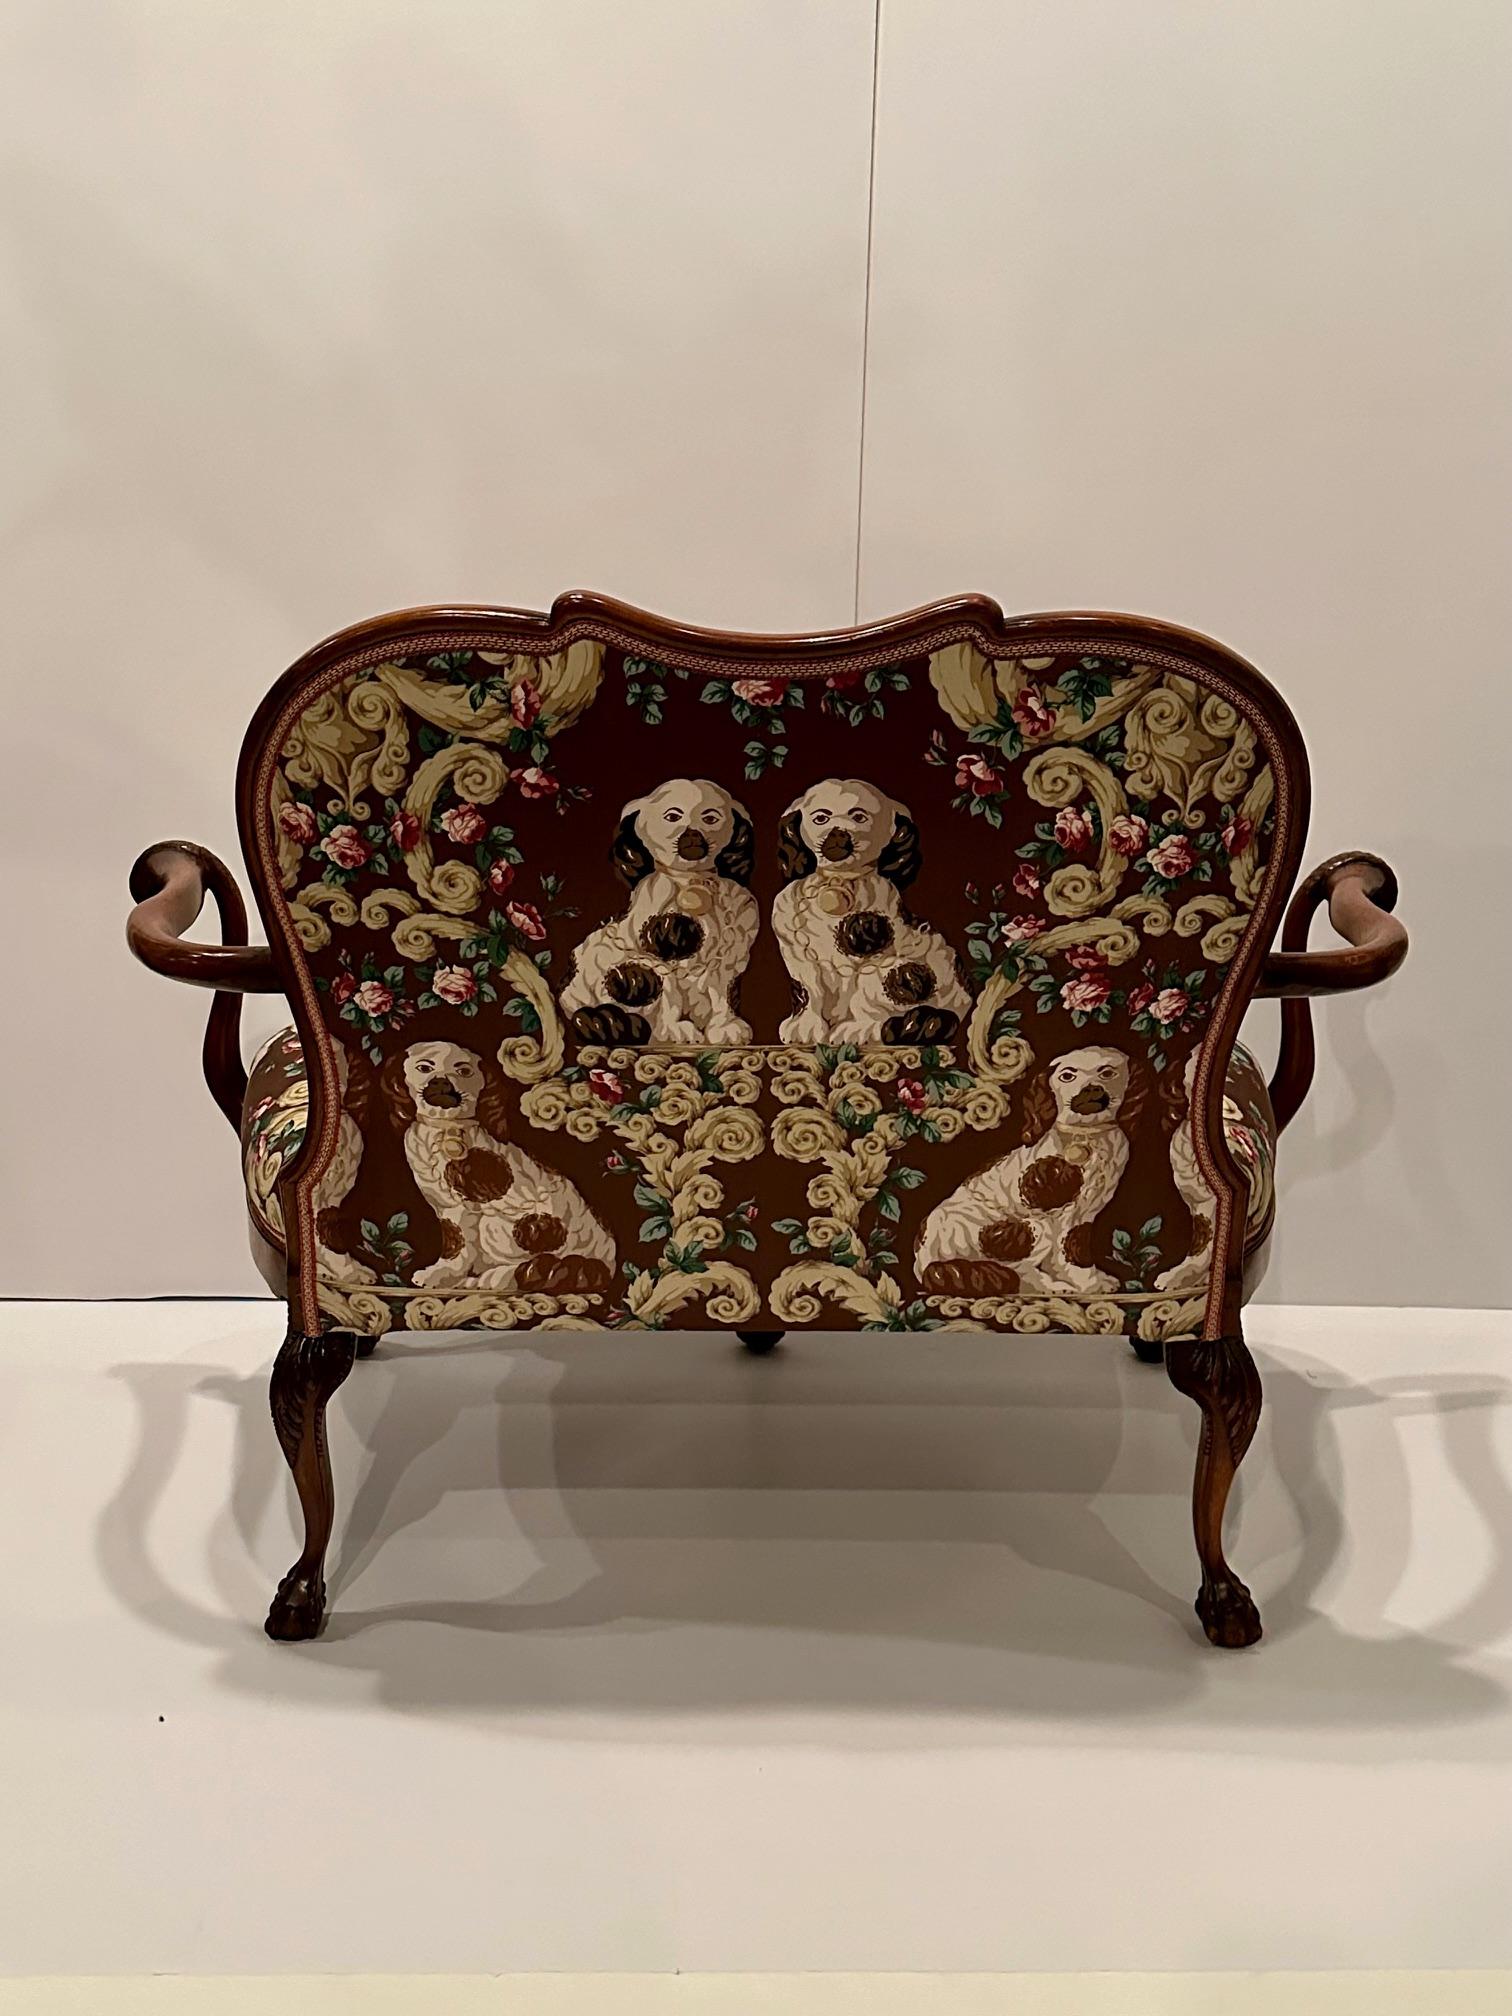 Striking Carved Burlwood & Mahogany Loveseat with Staffordshire Dog Motif Fabric For Sale 2